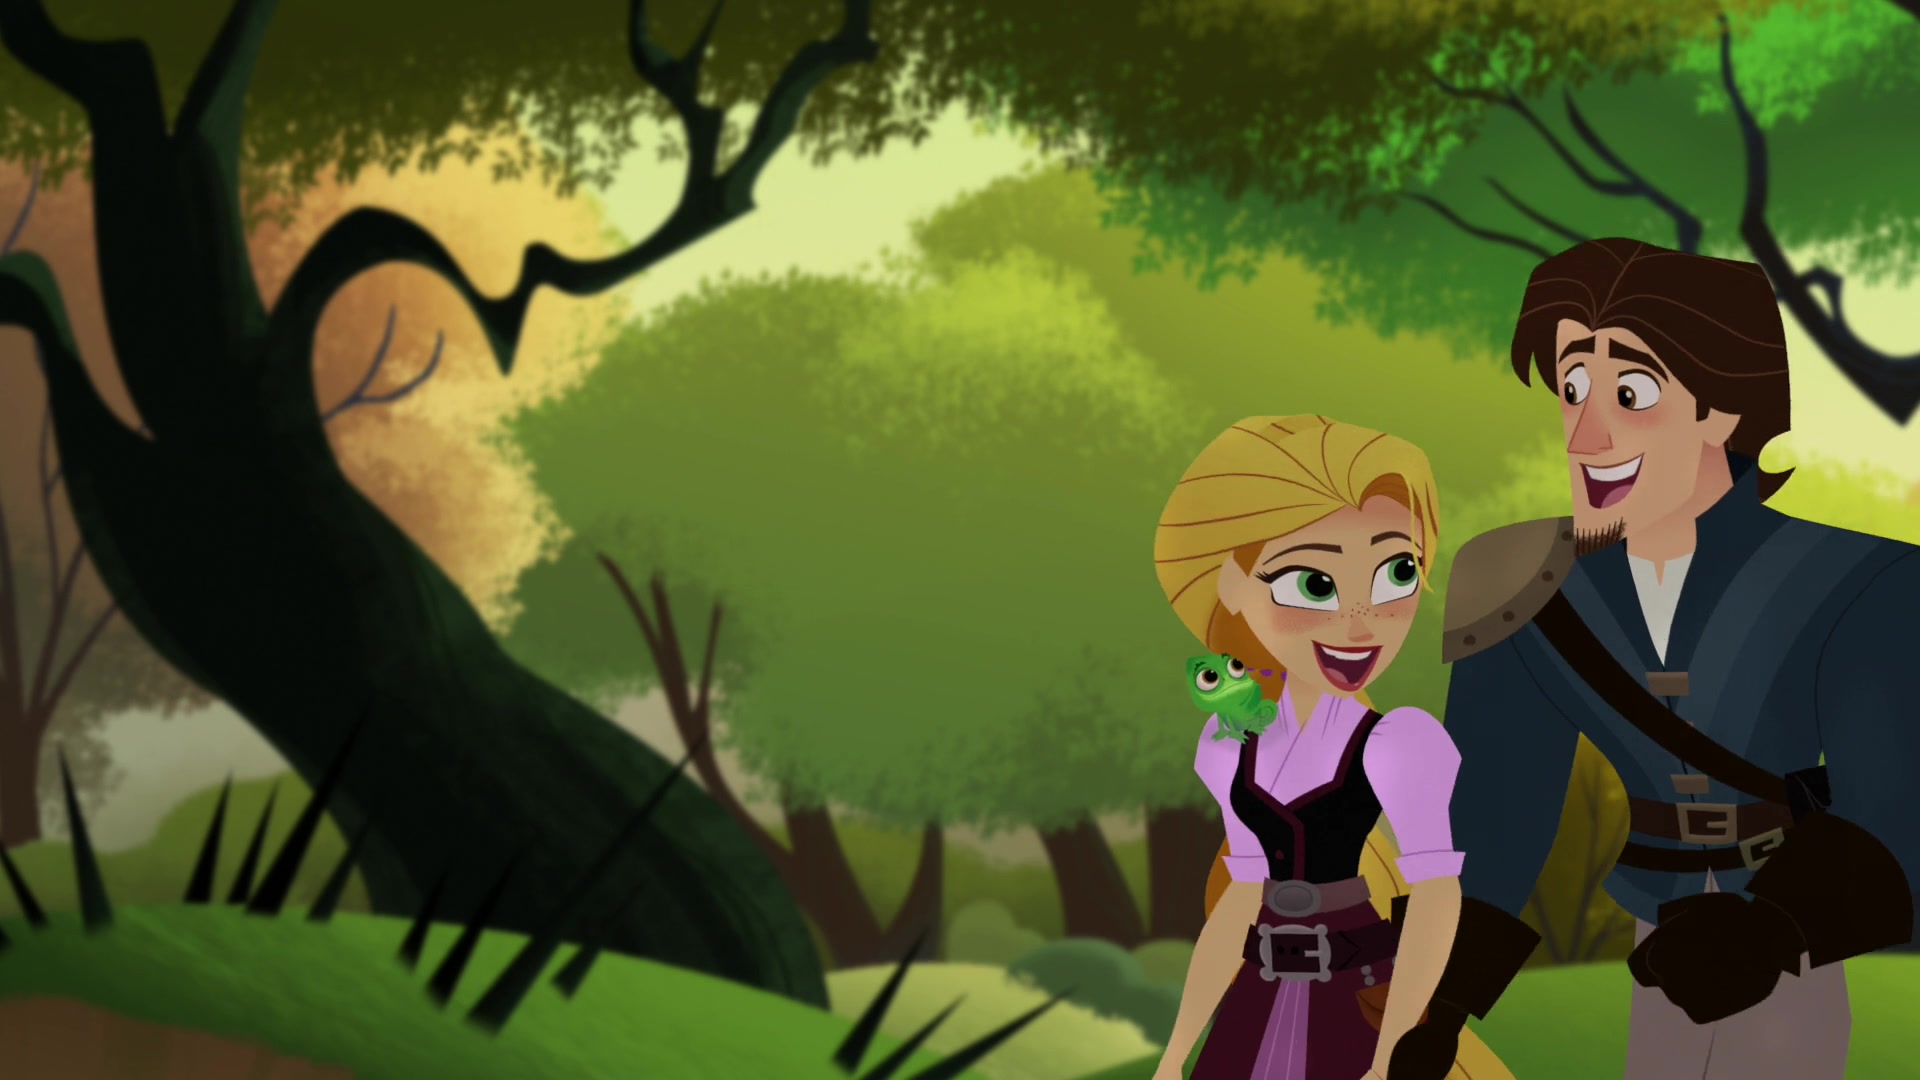 tangled full movie download youtube